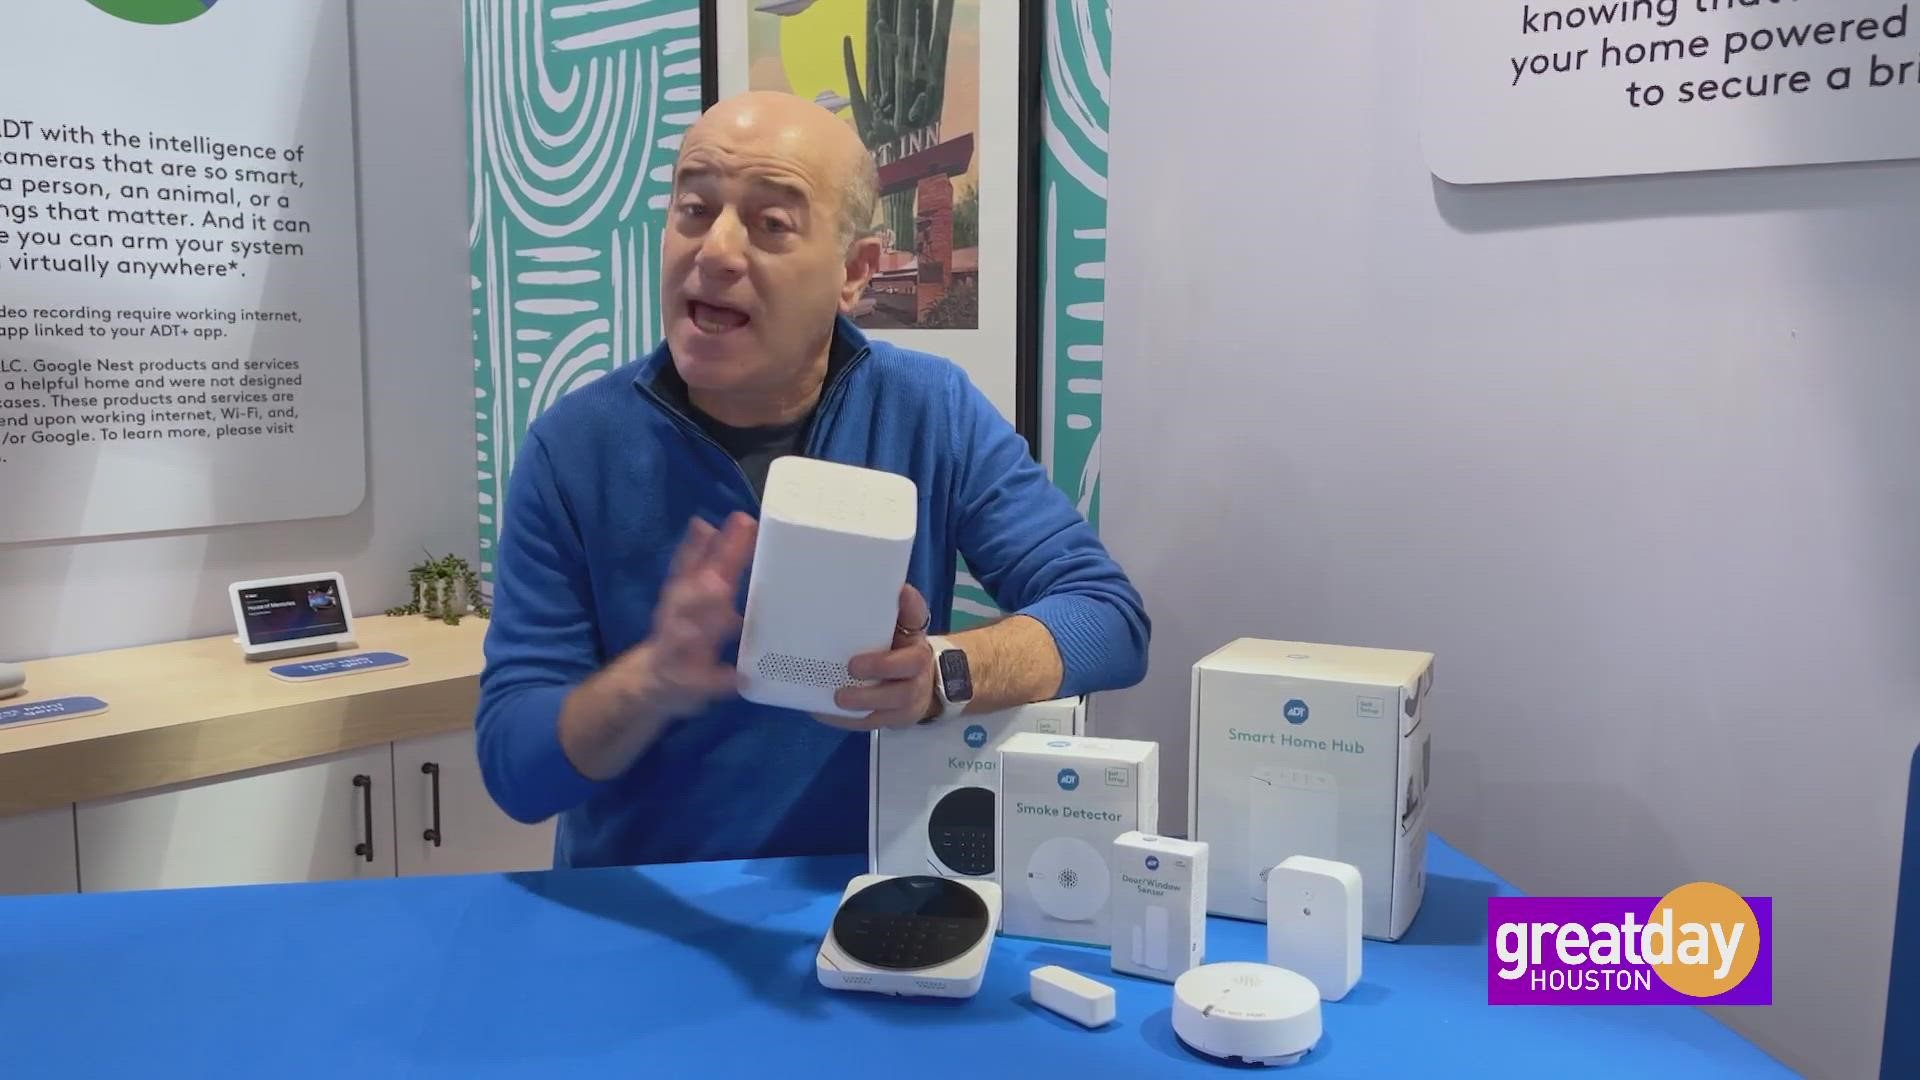 Earlier this month, Steve Greenberg visited the CES show. He shares his top favorite gadgets to help life run a lot smoother in the new year.